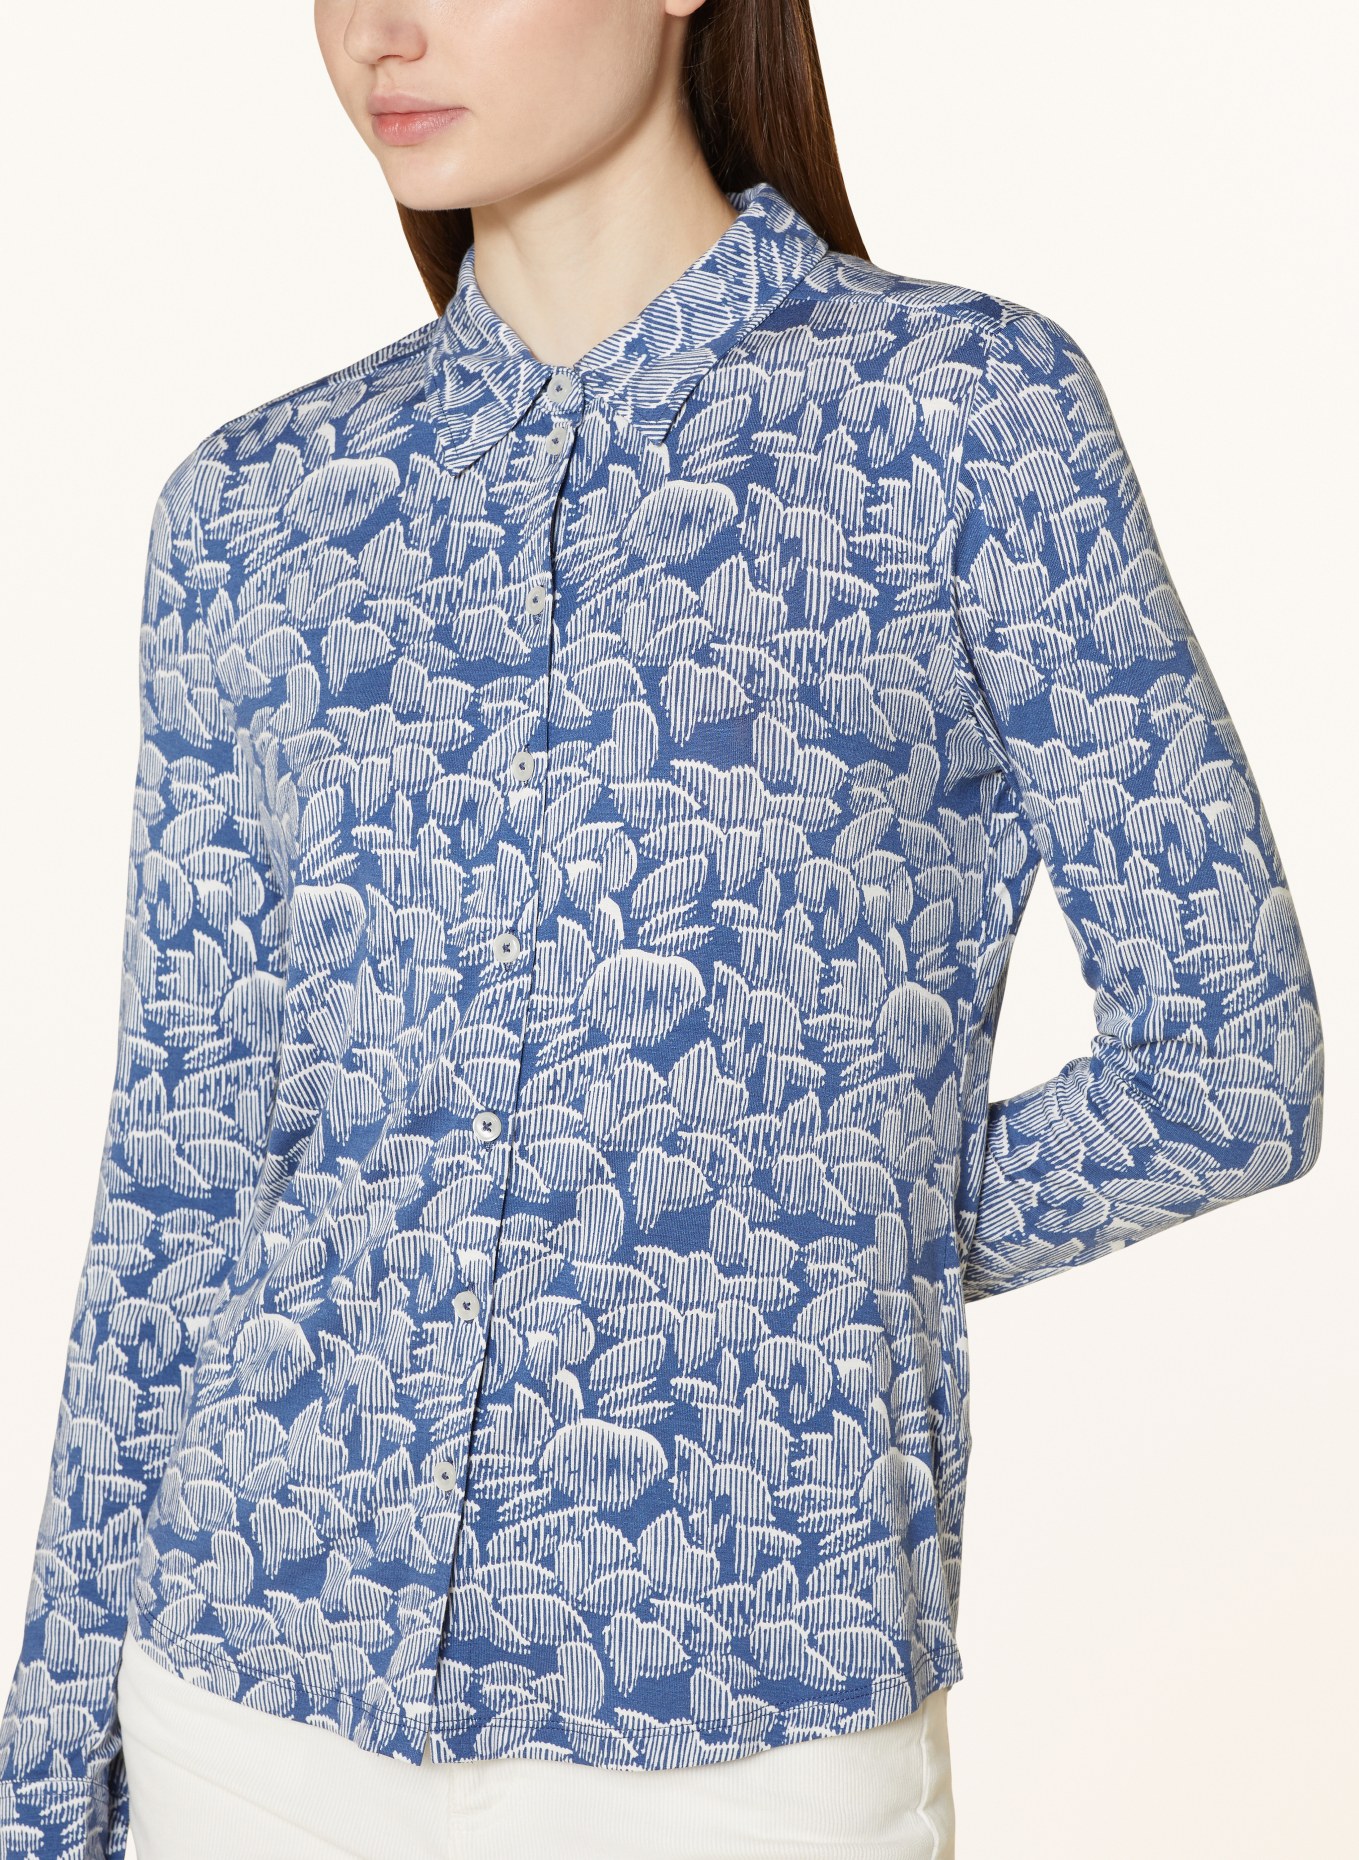 Marc O'Polo Shirt blouse made of jersey, Color: BLUE/ WHITE (Image 4)